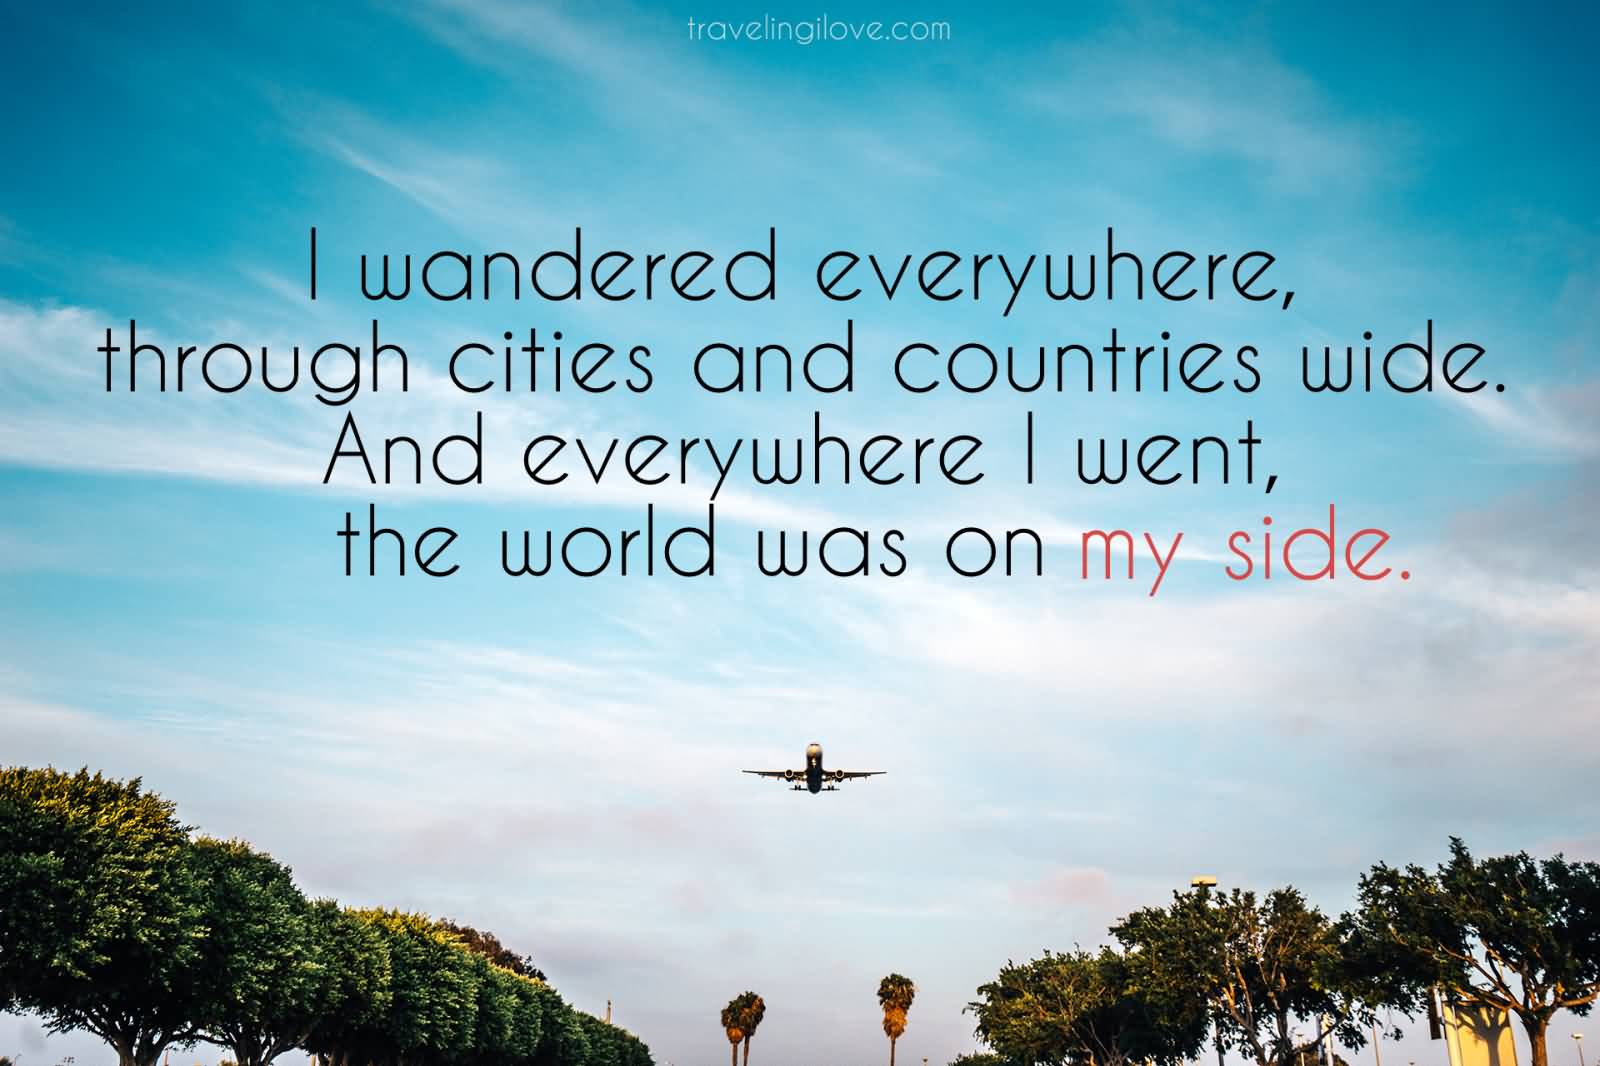 I wandered everywhere, through cities and countries wide. And everywhere I went, the world was on my side